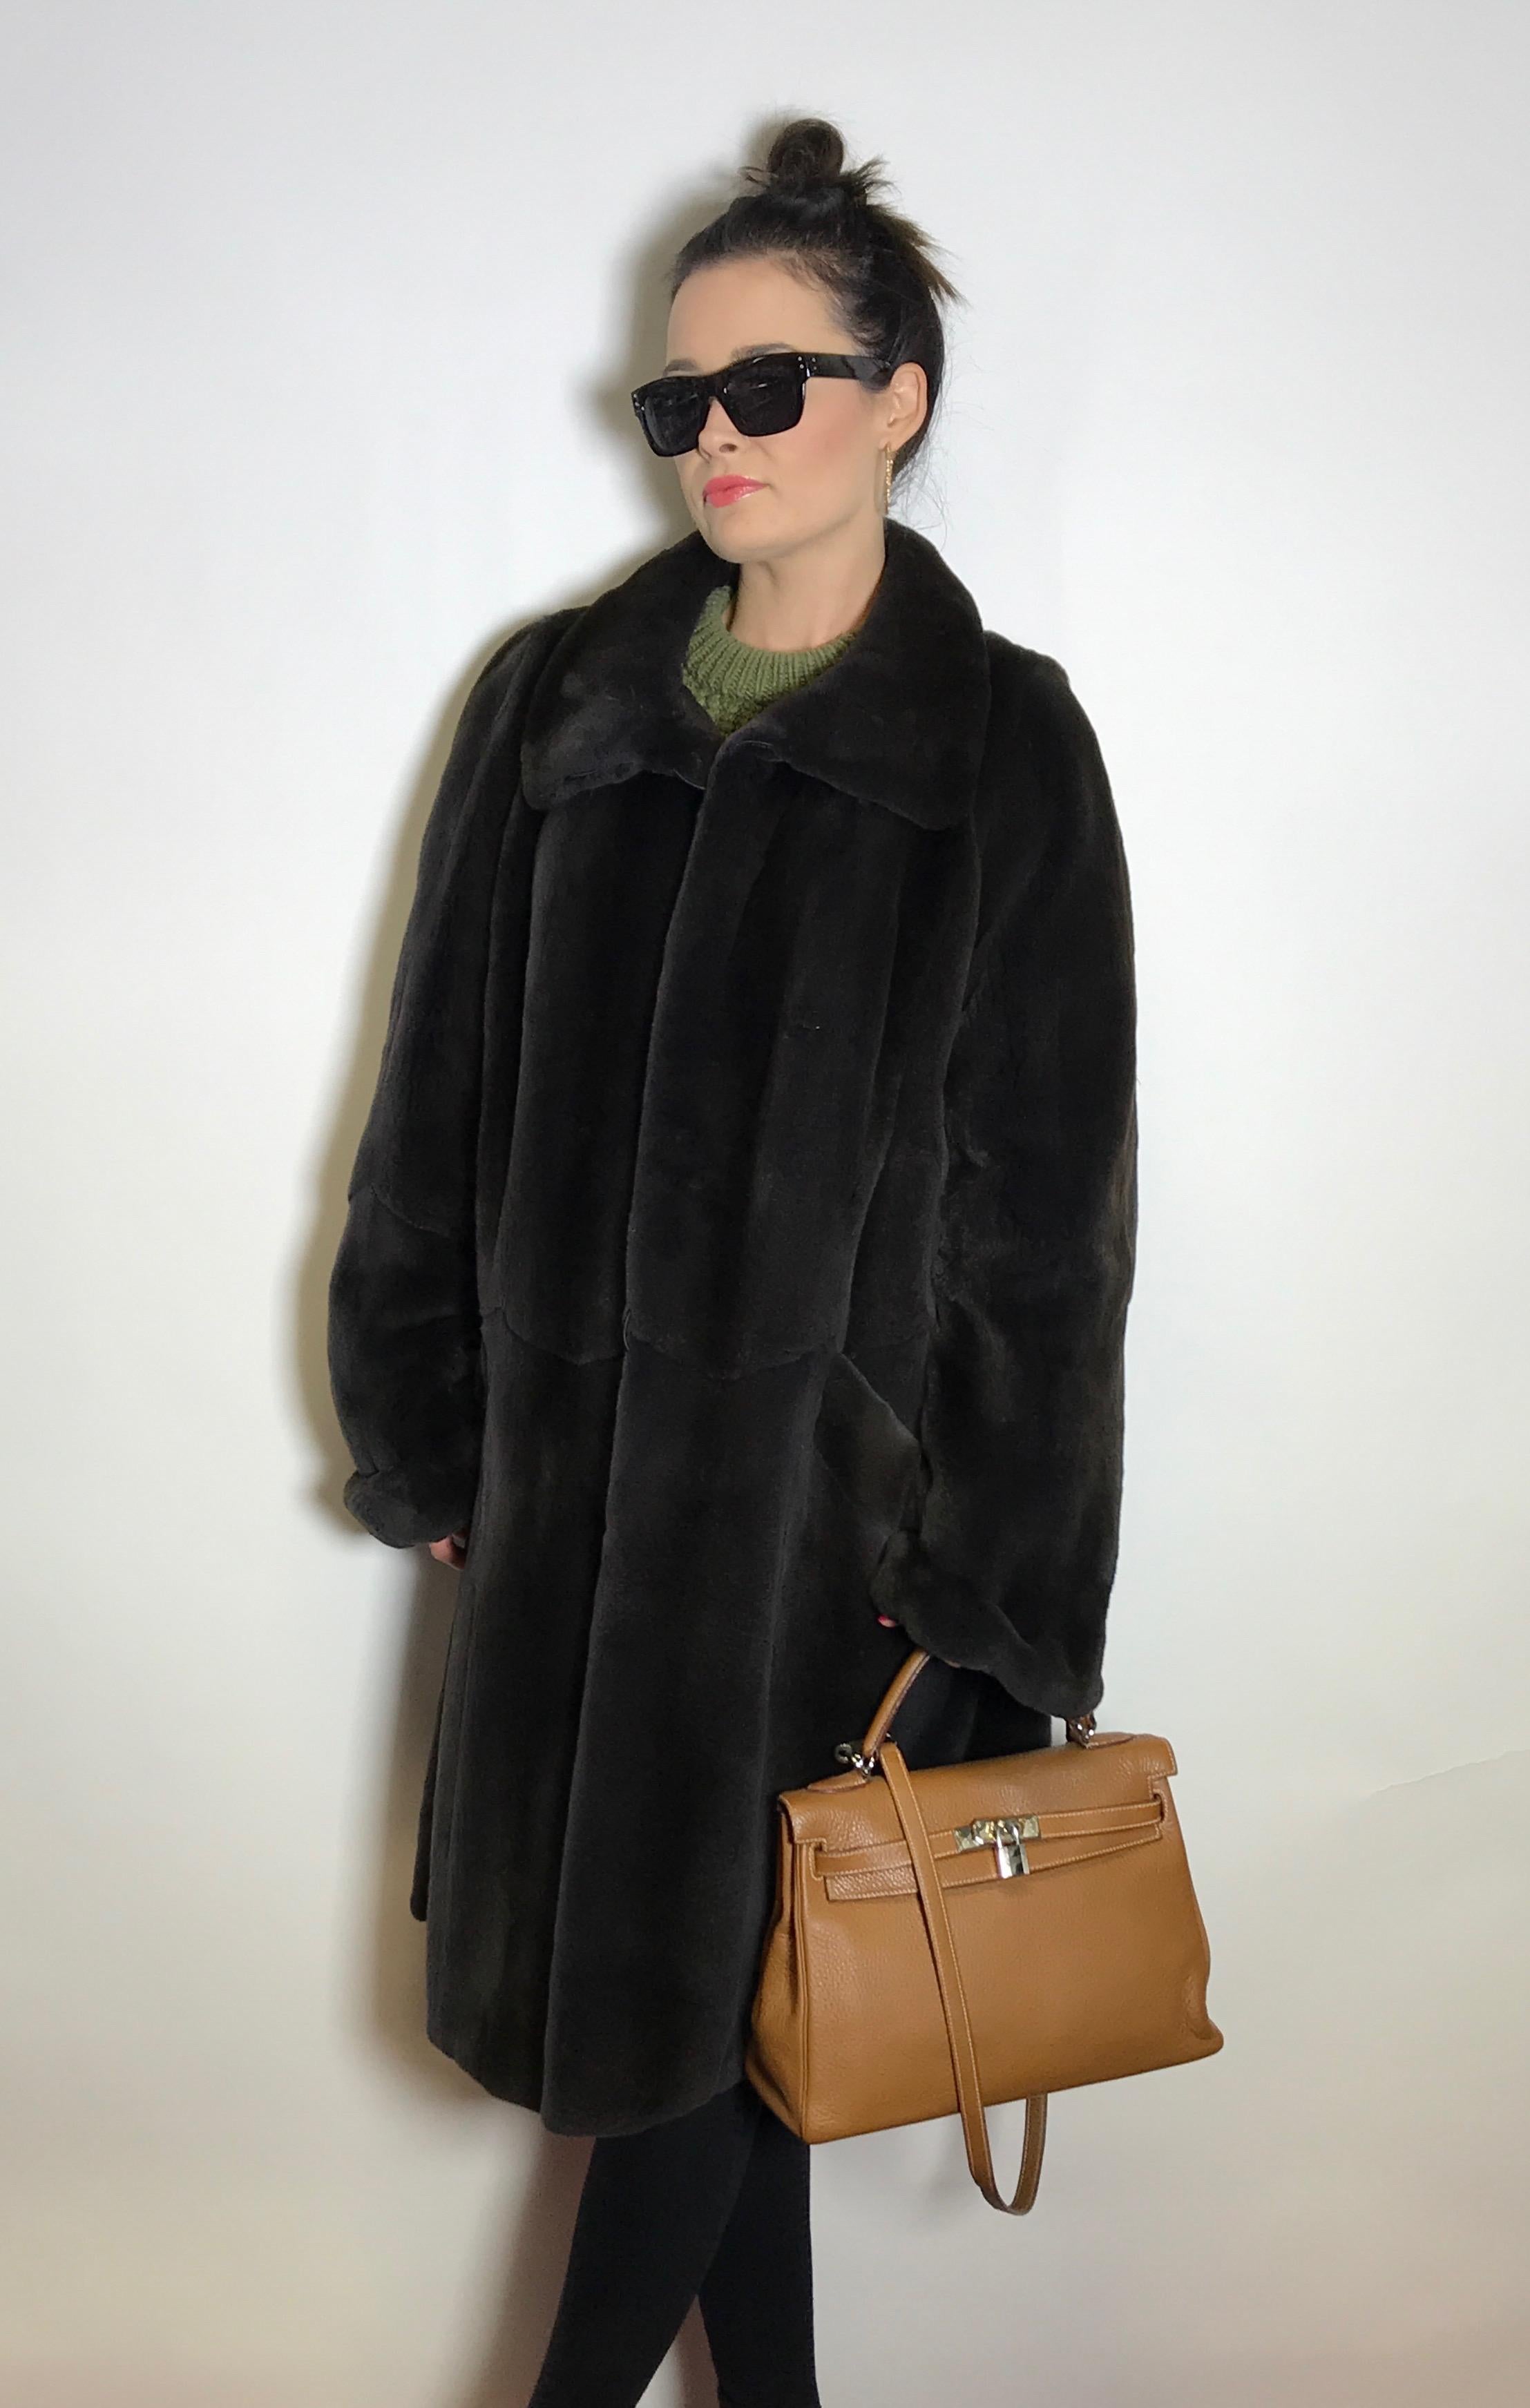 High class sheared black mink 3/4 jacket / coat.
Exclusively made by Dieter Apmann.

Size EU: 42-44 / L
Total length: 107 cm
Shoulder width: 44cm
Sleeve length: 63 cm

The coat is in excellent condition, almost never worn.

- Our model wears an EU